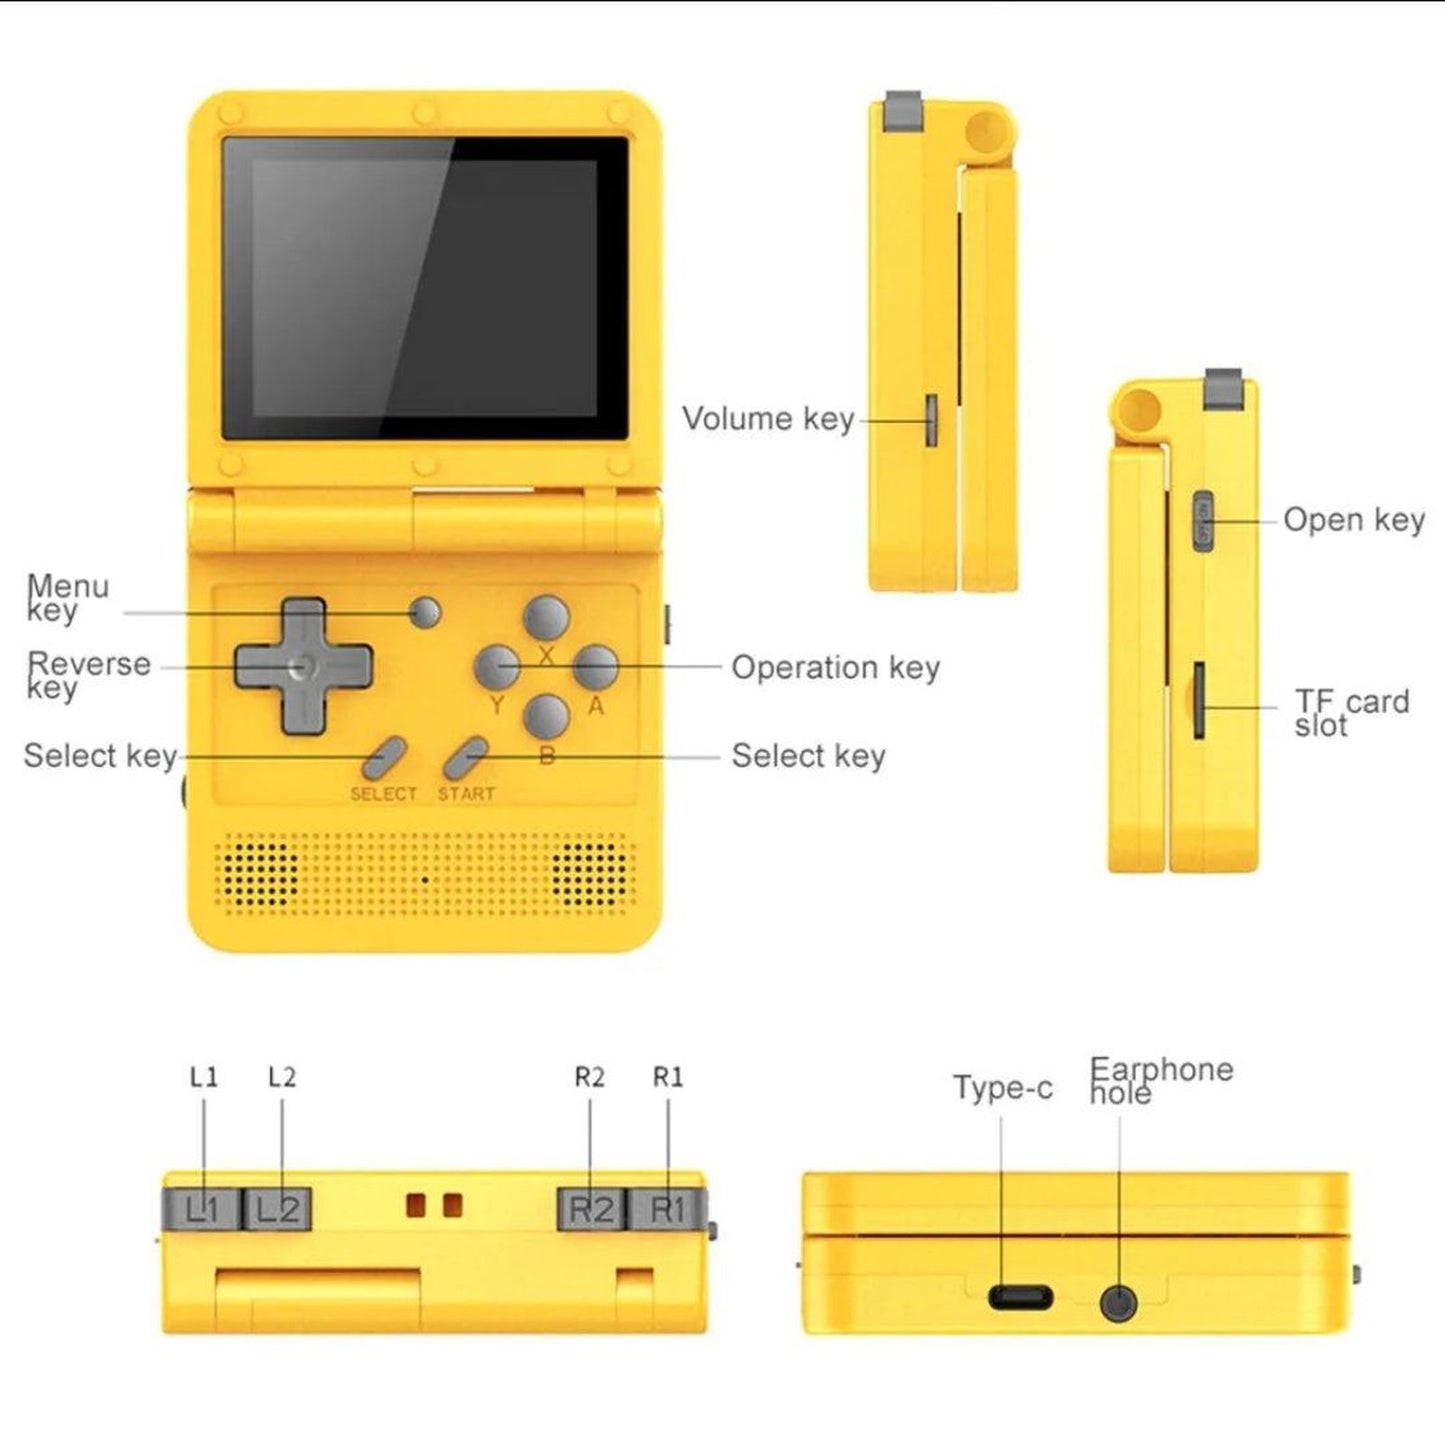 New Powkiddy V90 with custom operating system ultra pocket portable gaming handheld console 64GB Gameboy SP style - Arcadeclassics